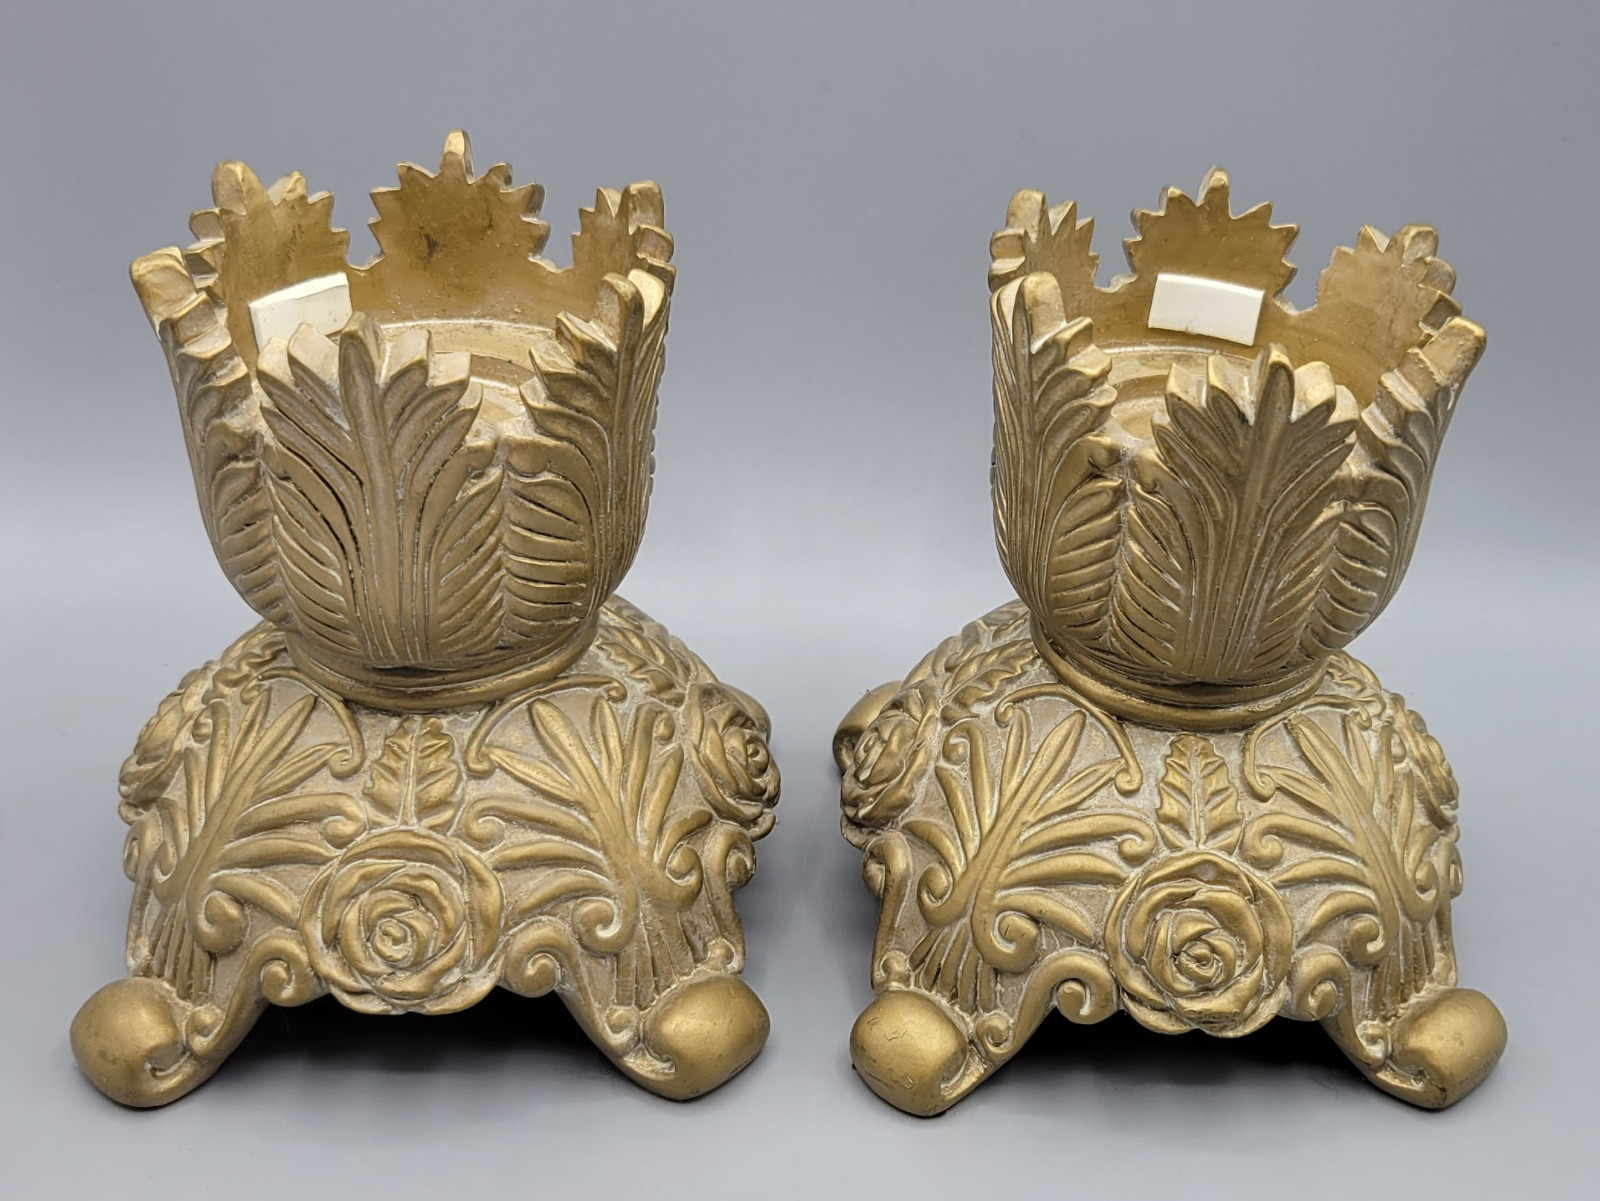 Vintage Gold Resin Pair of Victorian Style Decorative Candle Holders Leaf Design